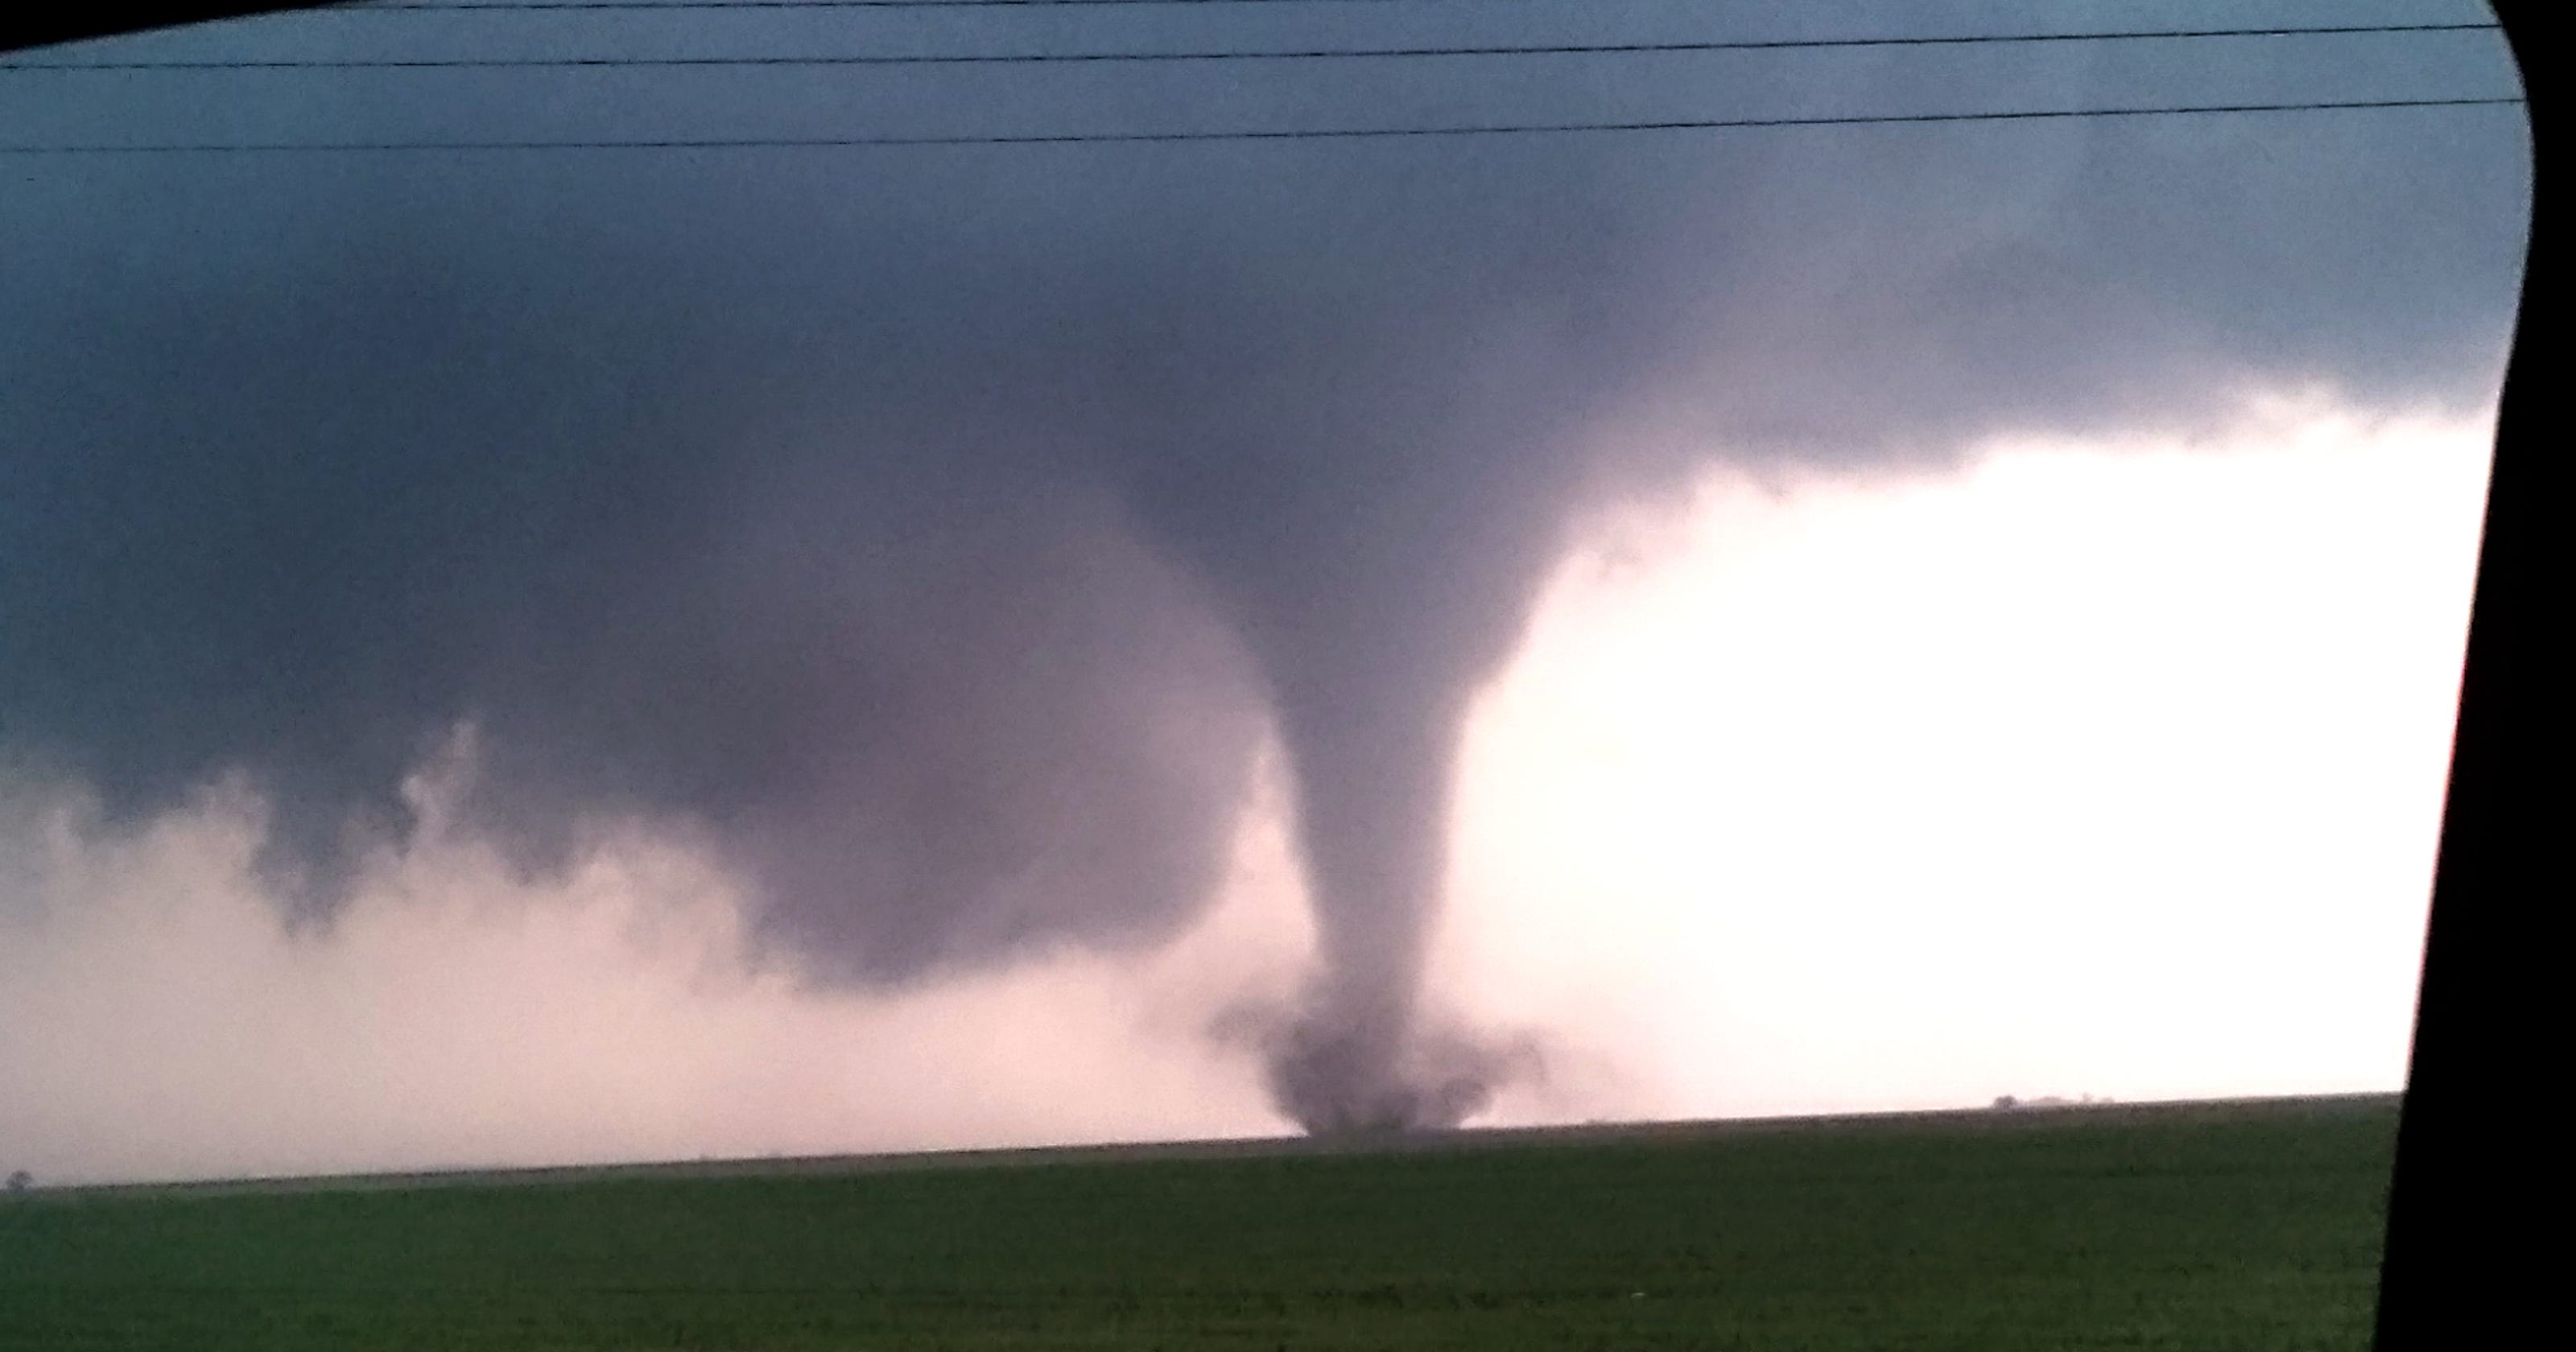 Tornadoes reported north of Abilene3200 x 1680